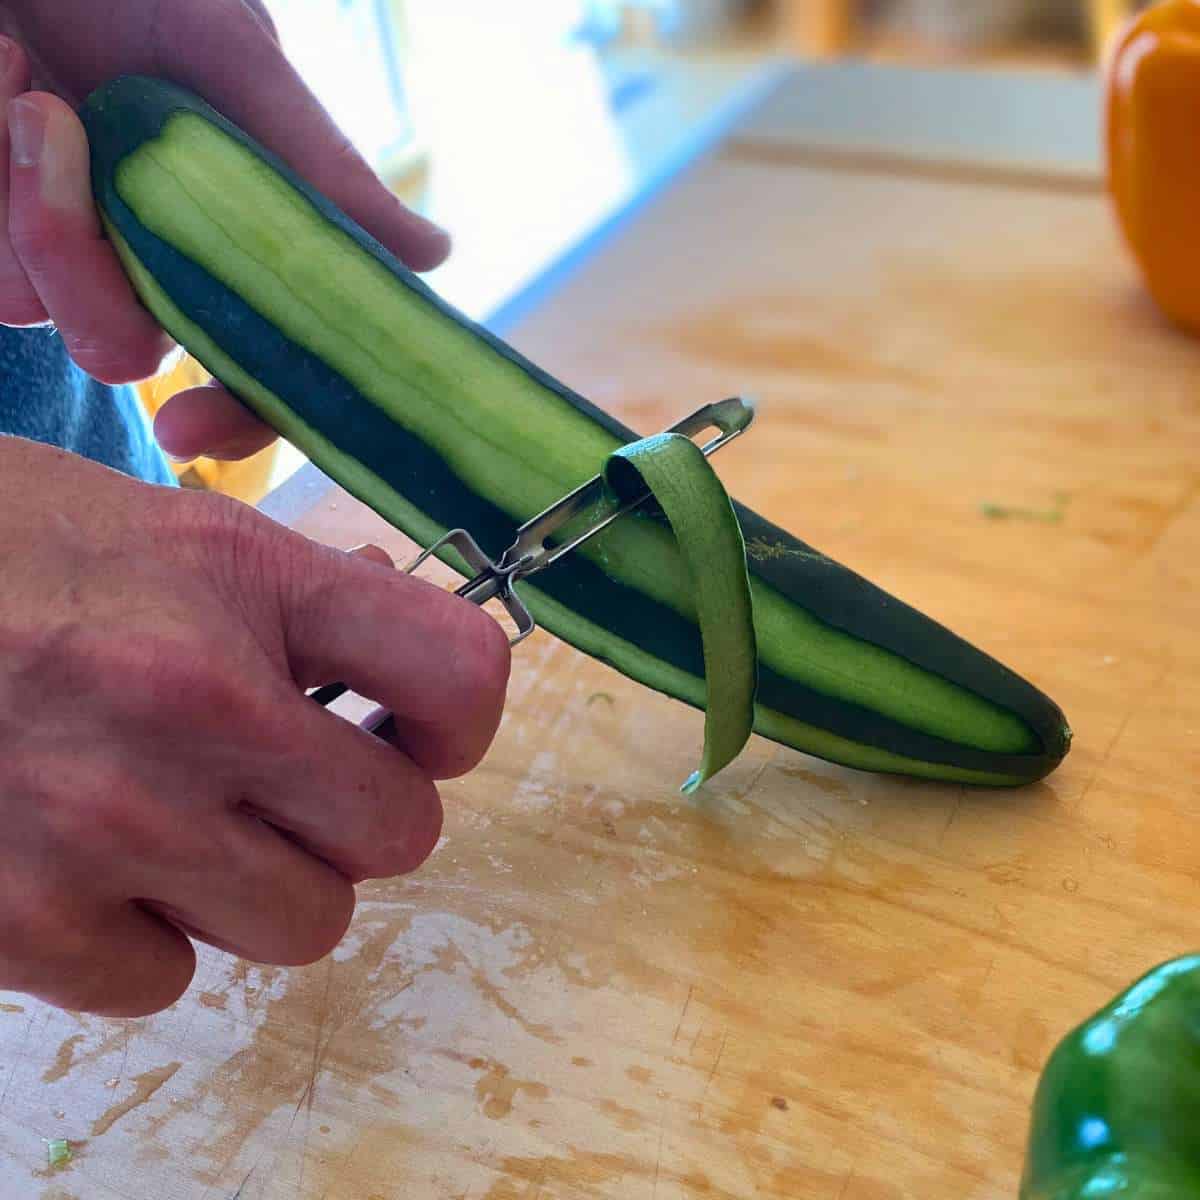 A vegetable peeler being used to remove strips of the skin of a cucumber.